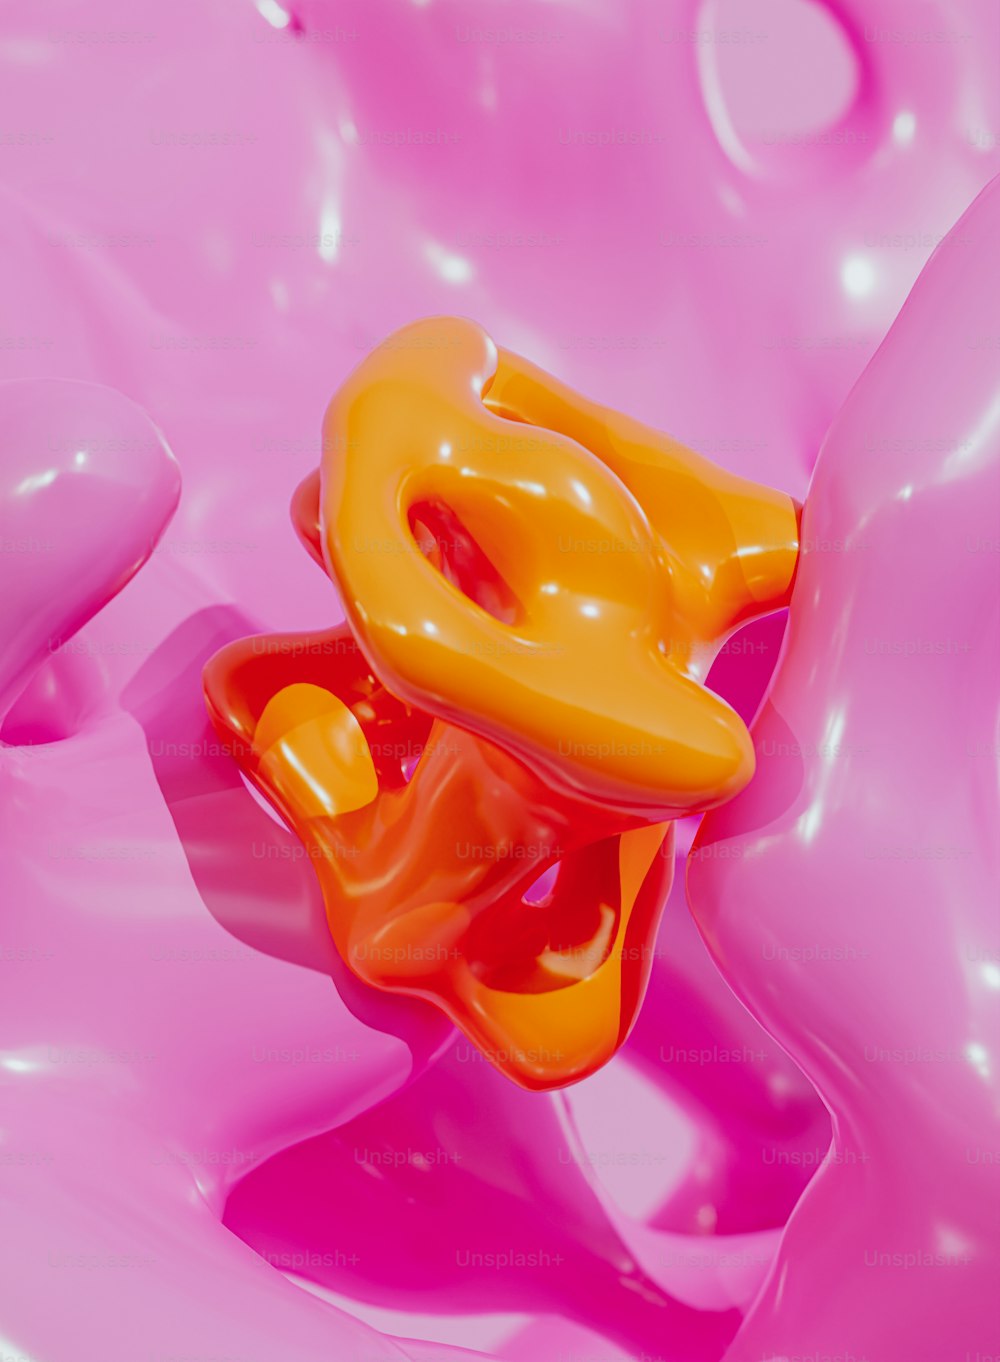 a close up of a pink and orange object